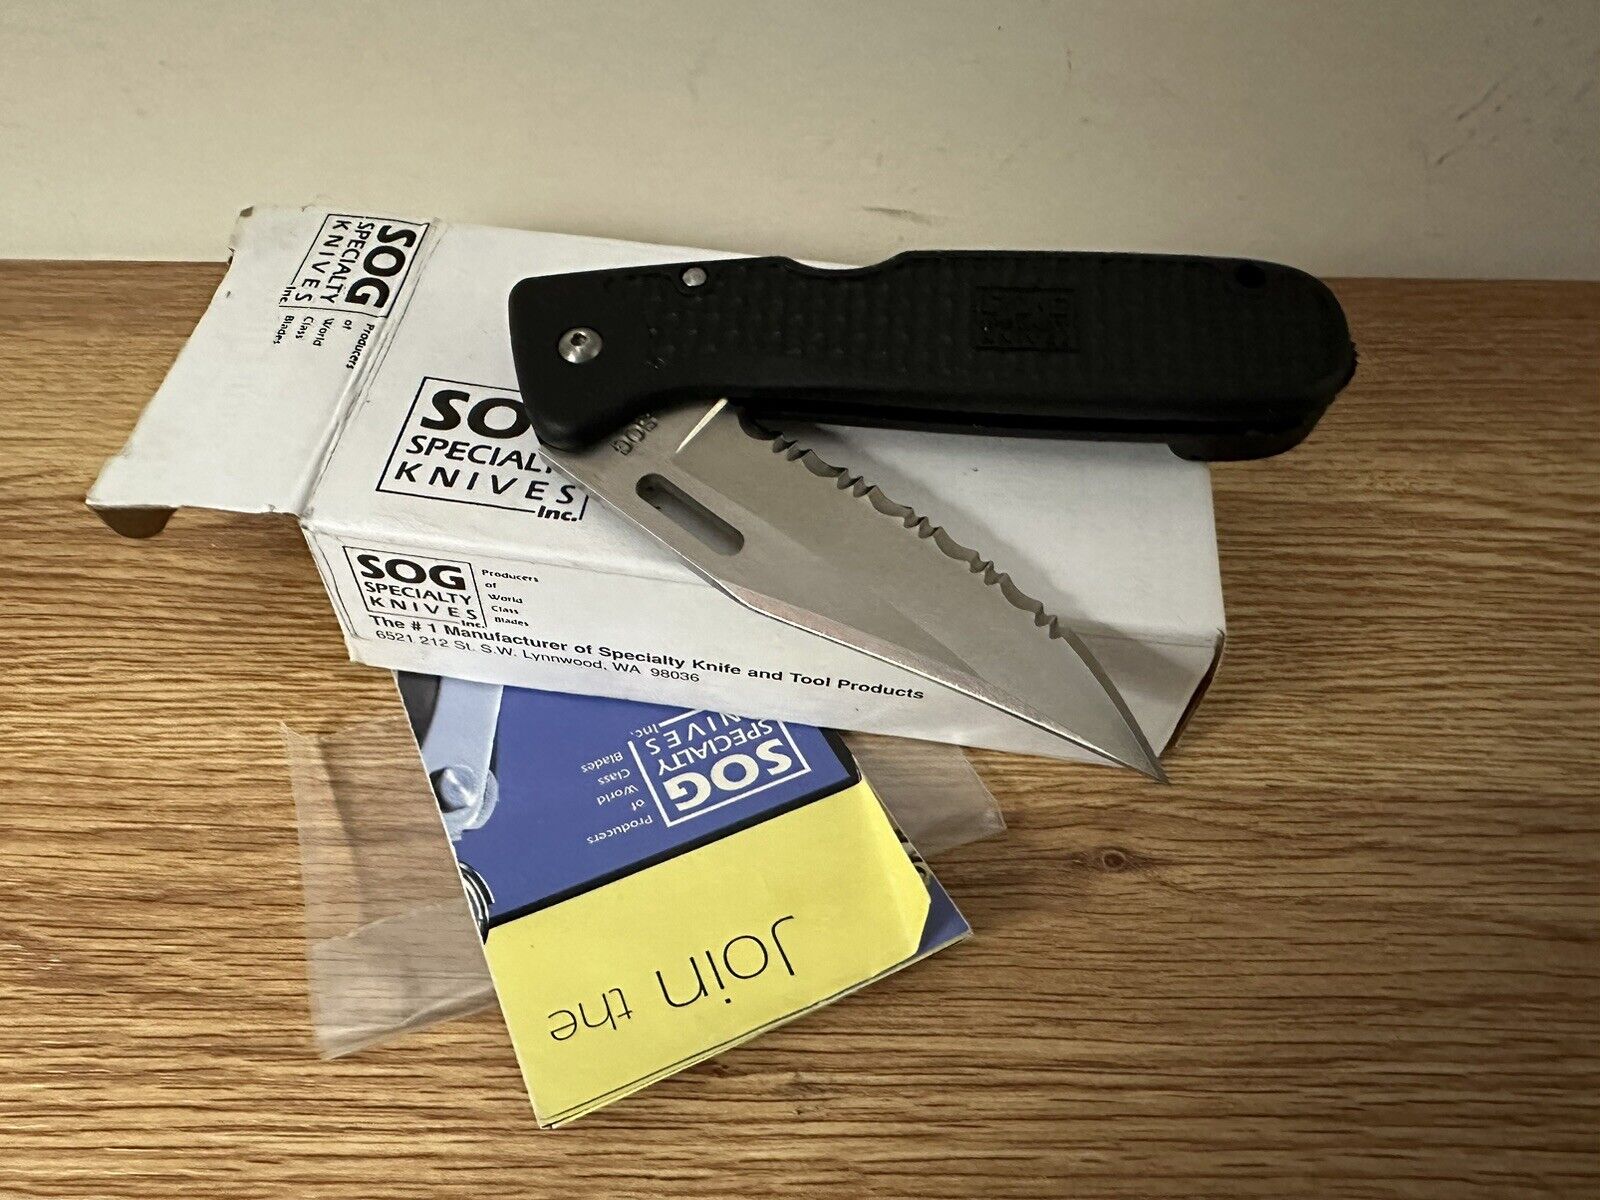 SOG Large Auto-clip Serrated ( NOS) Brand New Discontinued Knife 1996 